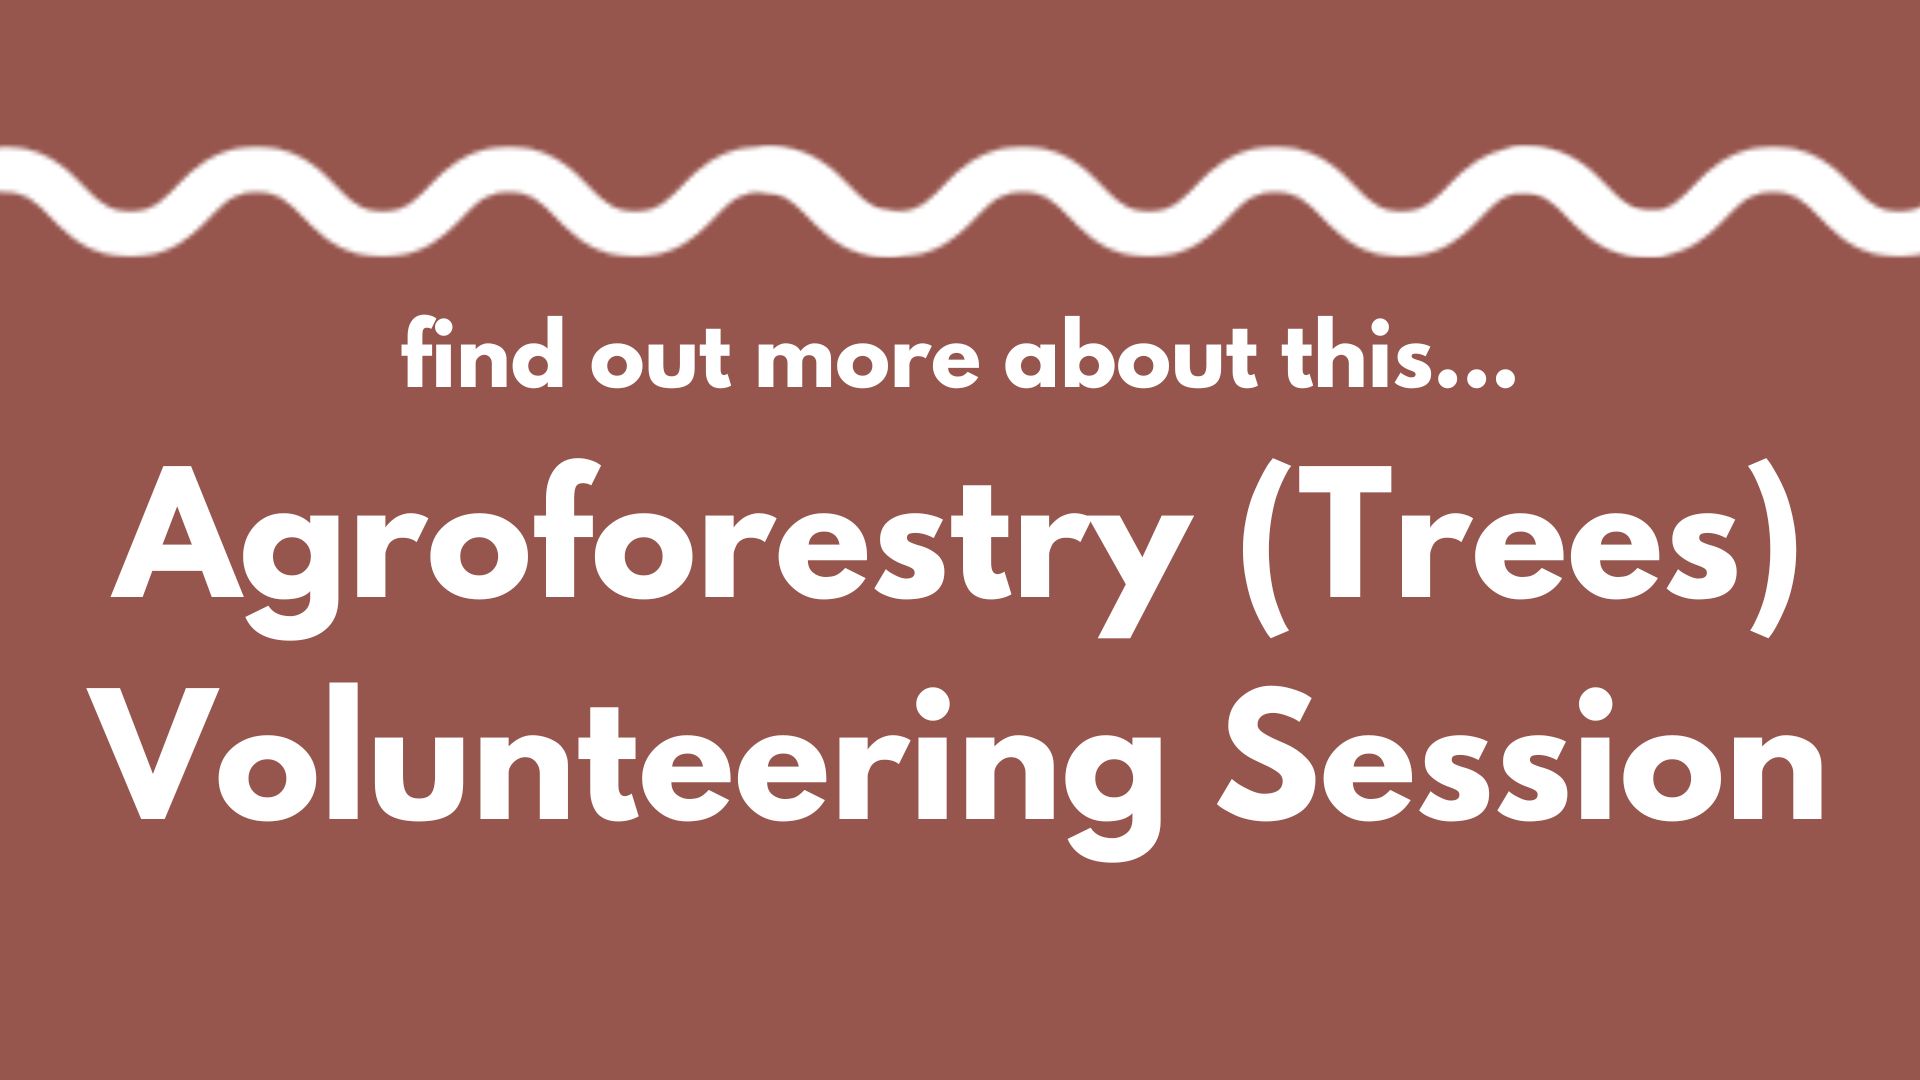 A white wavy line on a brown background above the words: Find out more about this... Agroforestry (Trees) Volunteering Session